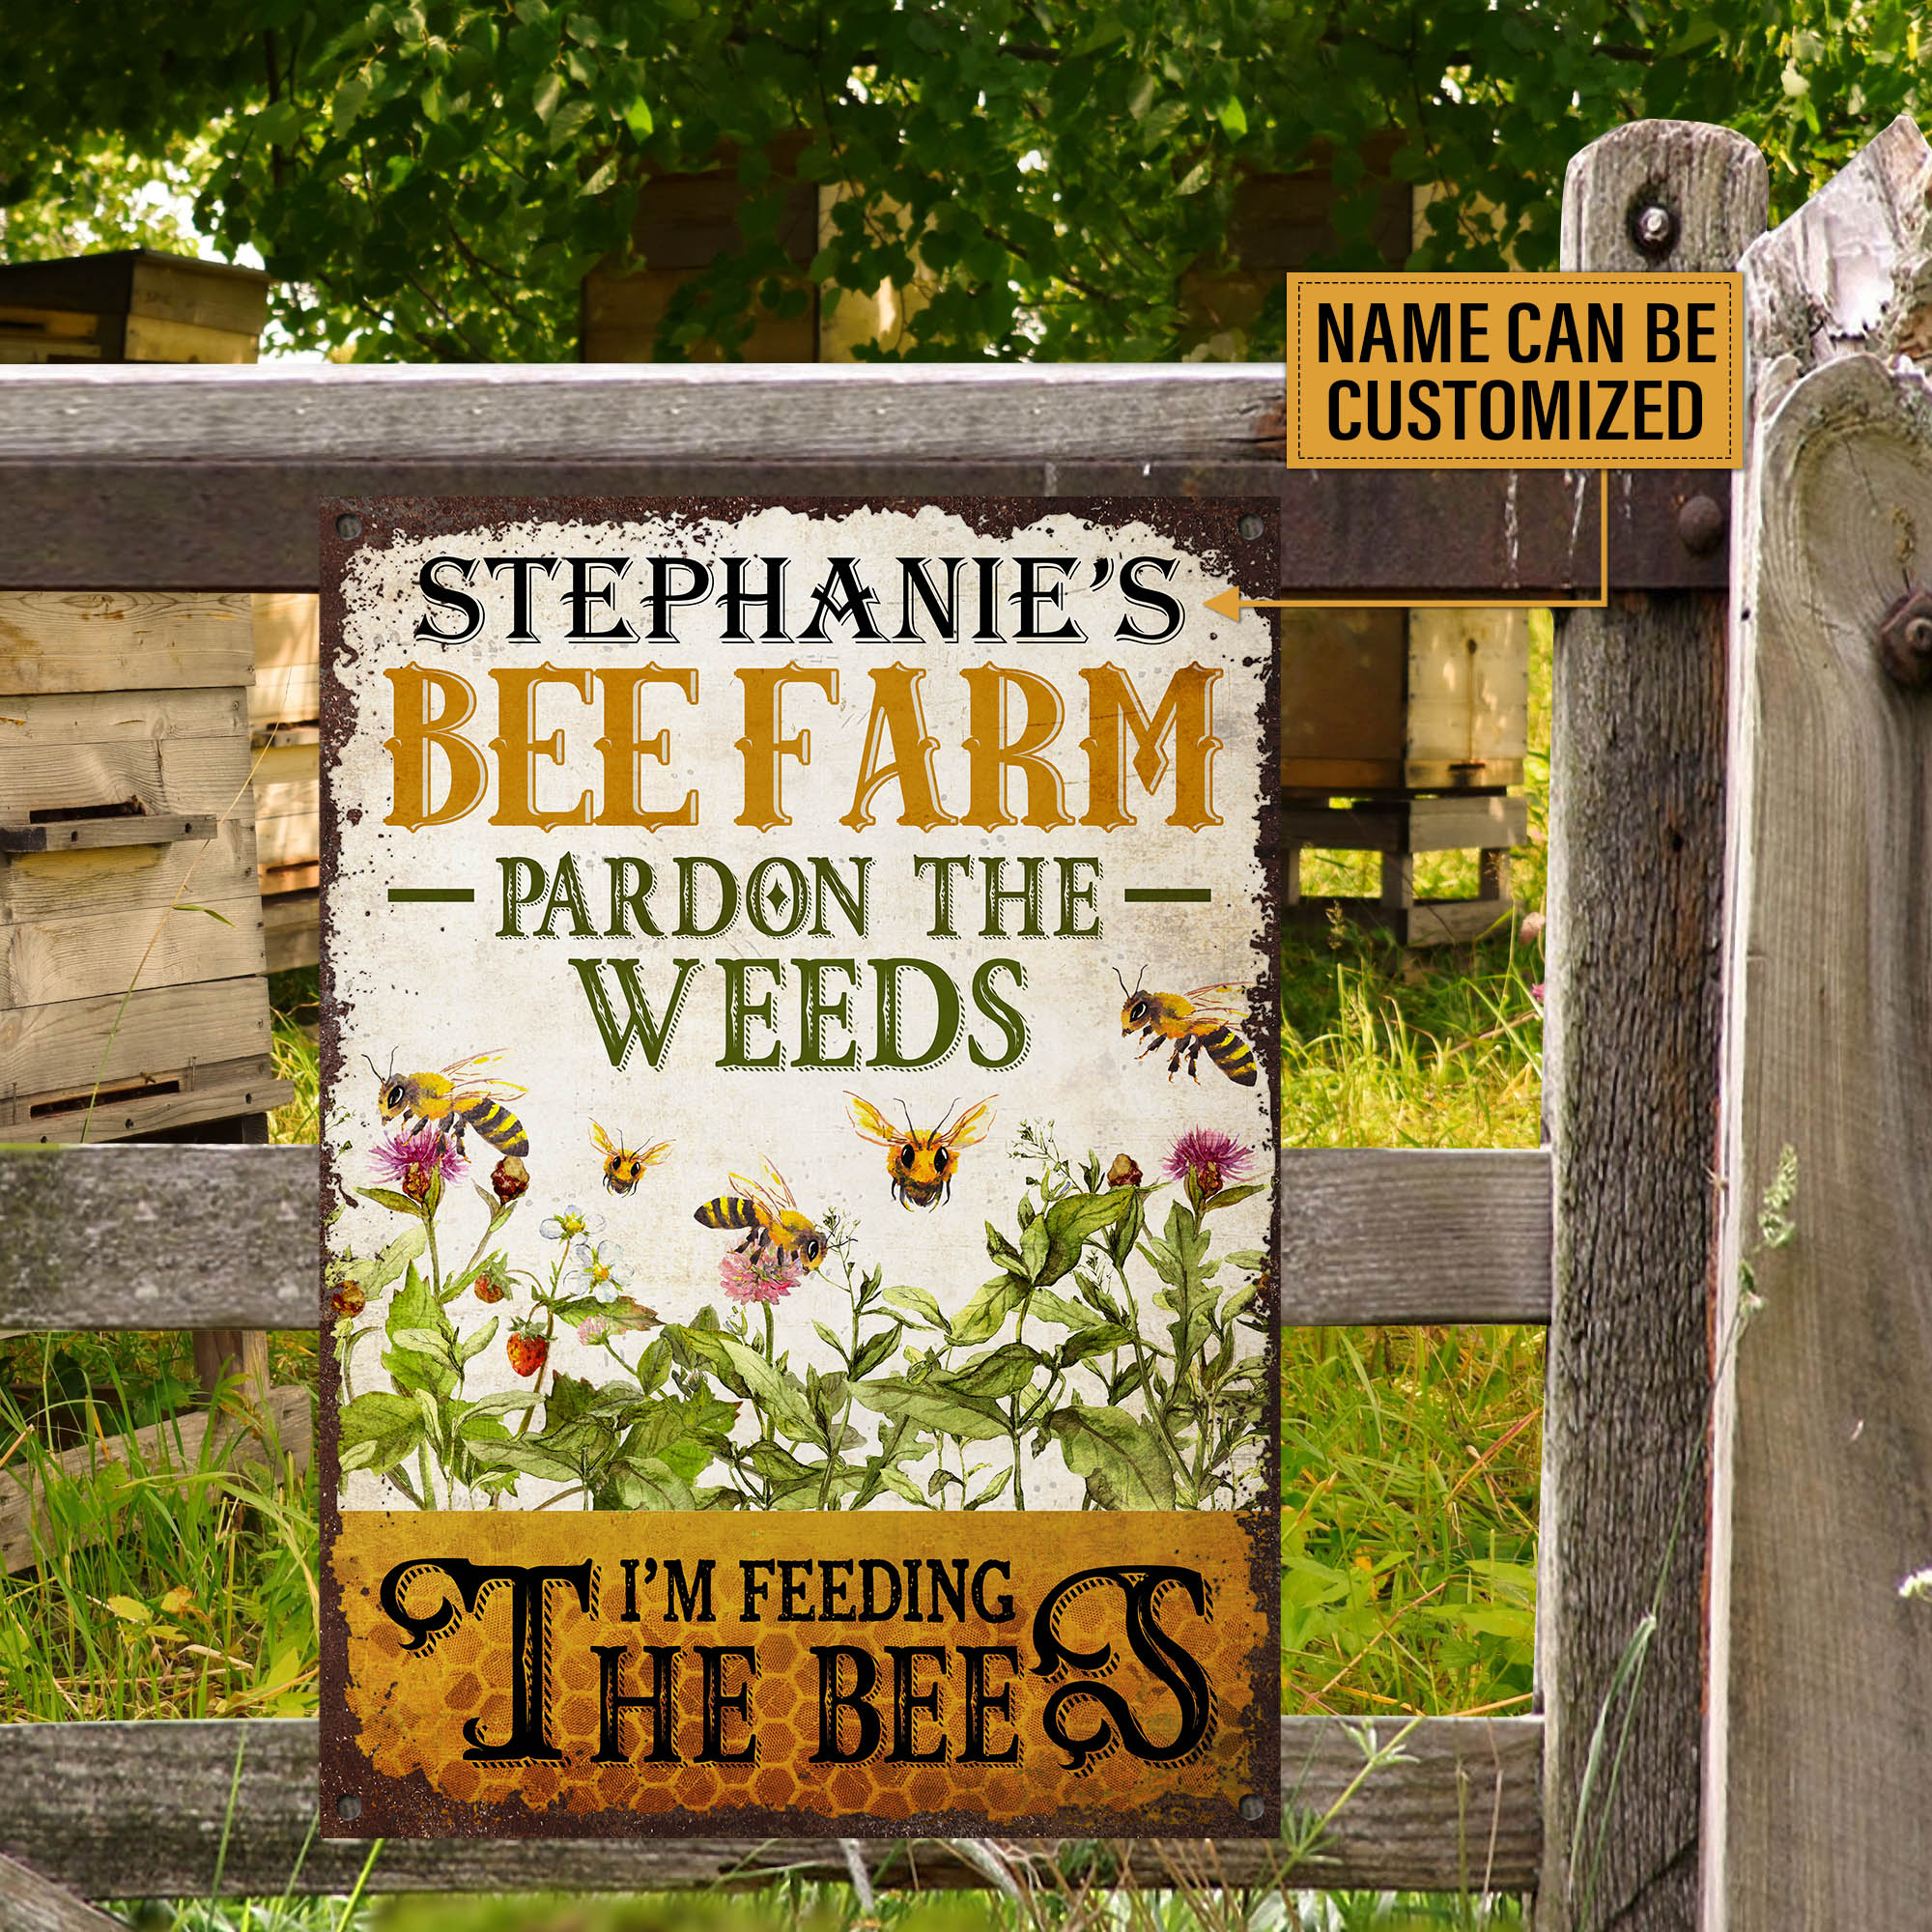 Personalized Bee Farm Feeding The Bee Customized Classic Metal Signs